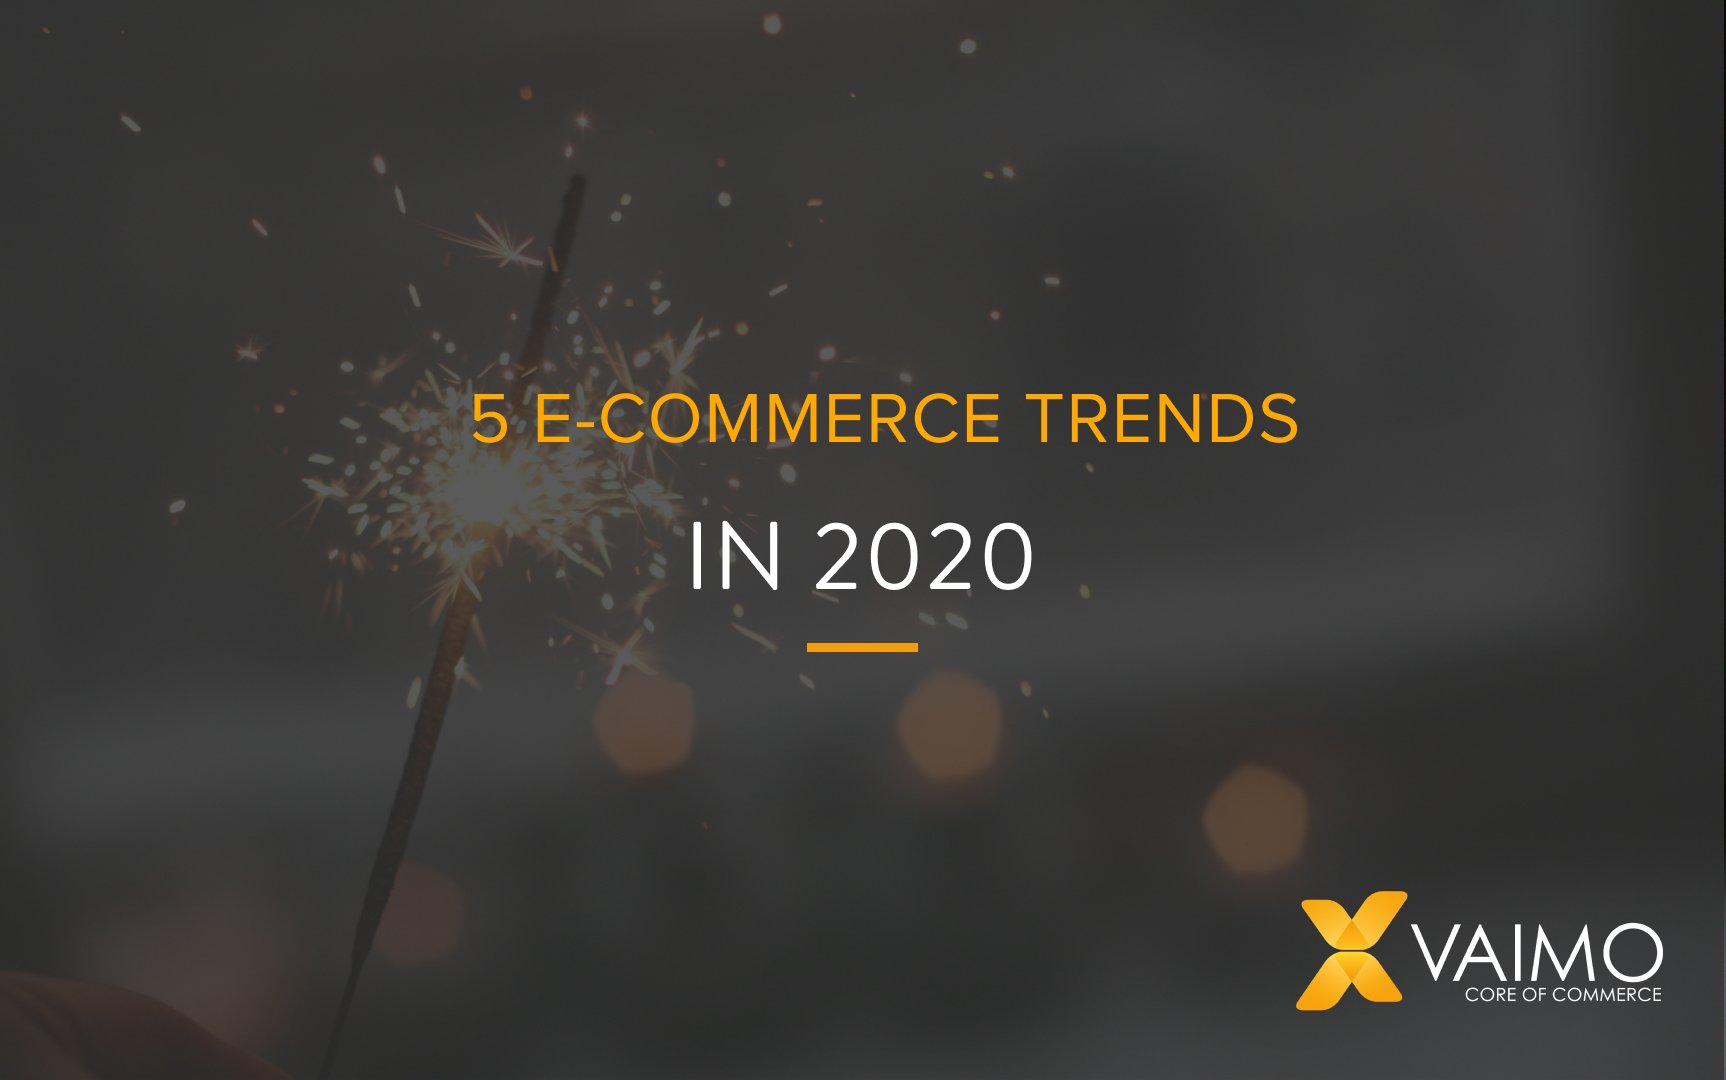 5 e-commerce trends in 2020